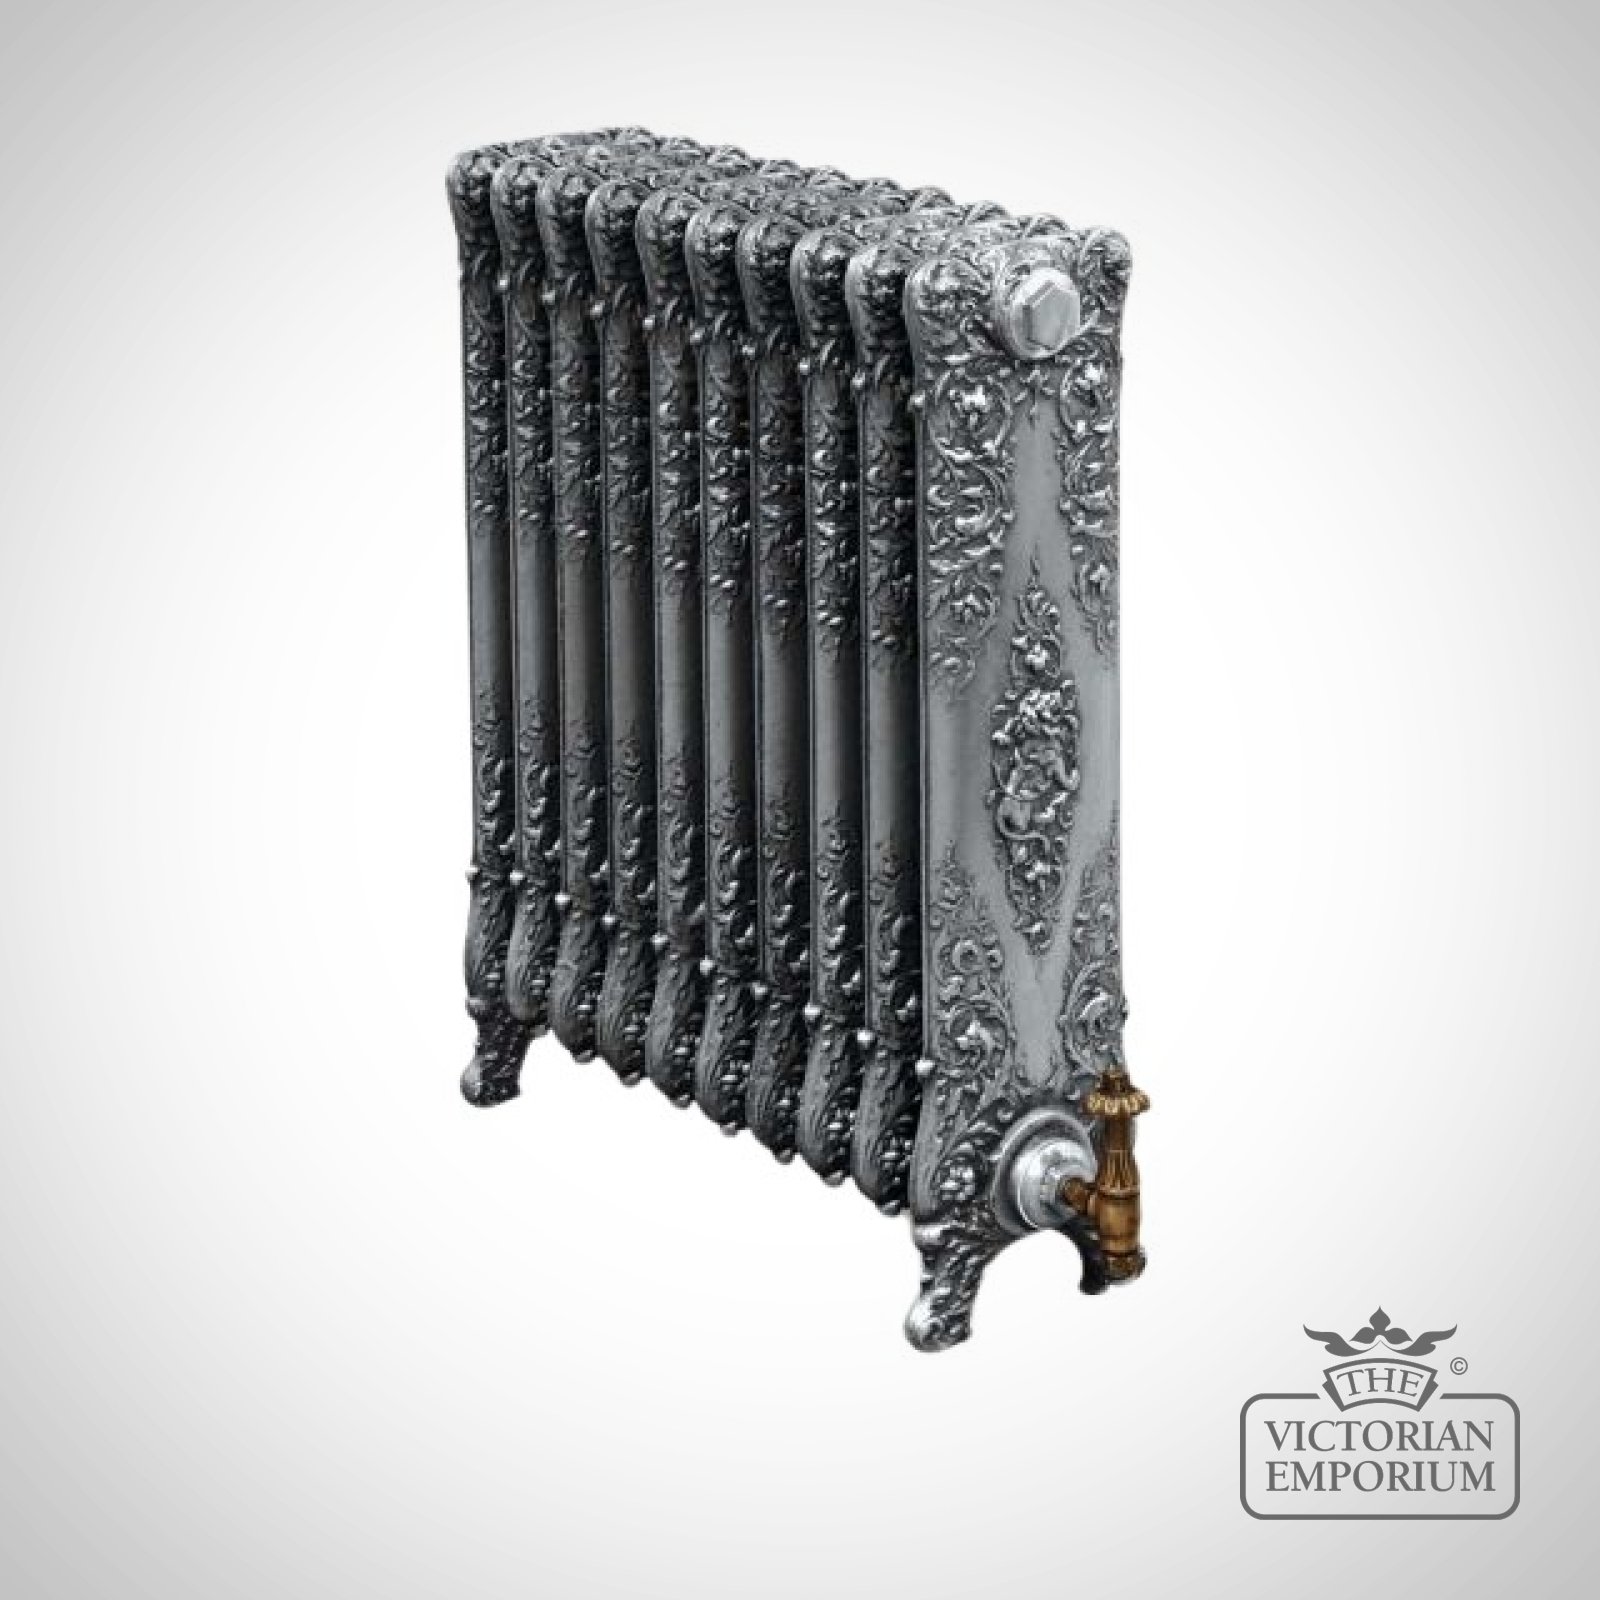 St Mark Electric Cast Iron Radiator with Traditional Ornate Design - 800mm high